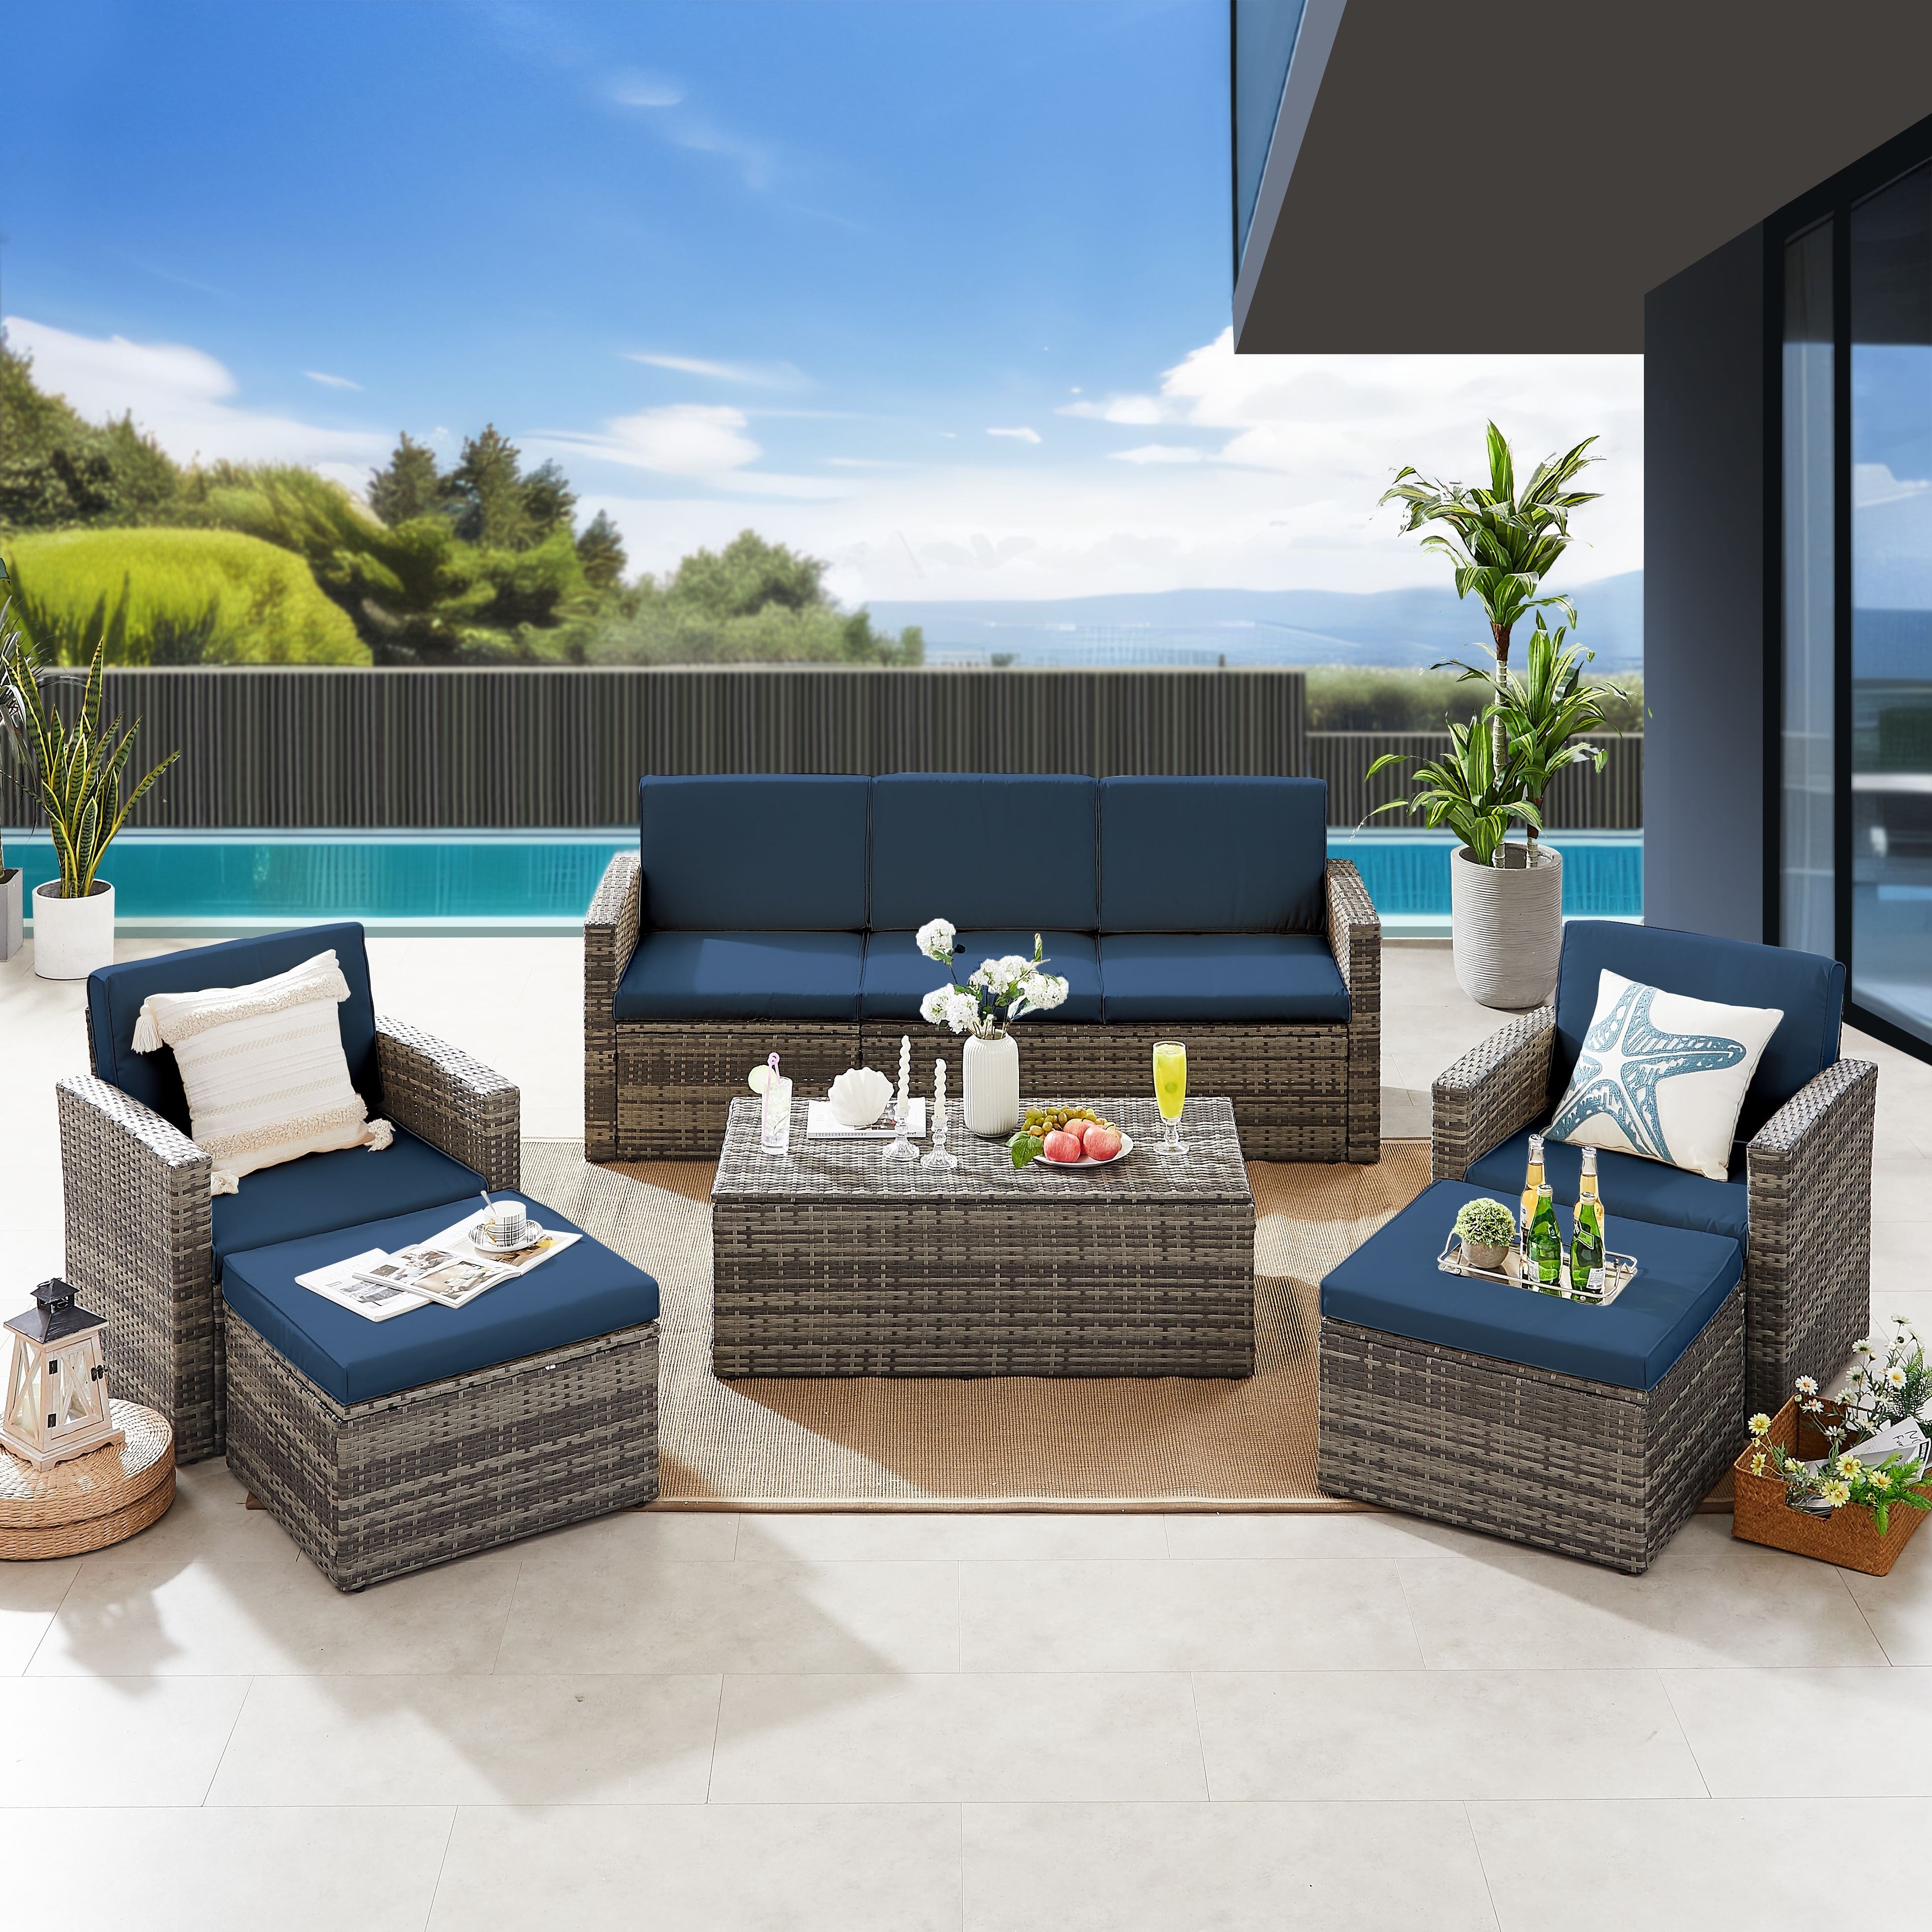 6 Pieces Wicker Outdoor Conversation Sectional Sofa With Waterproof Covers